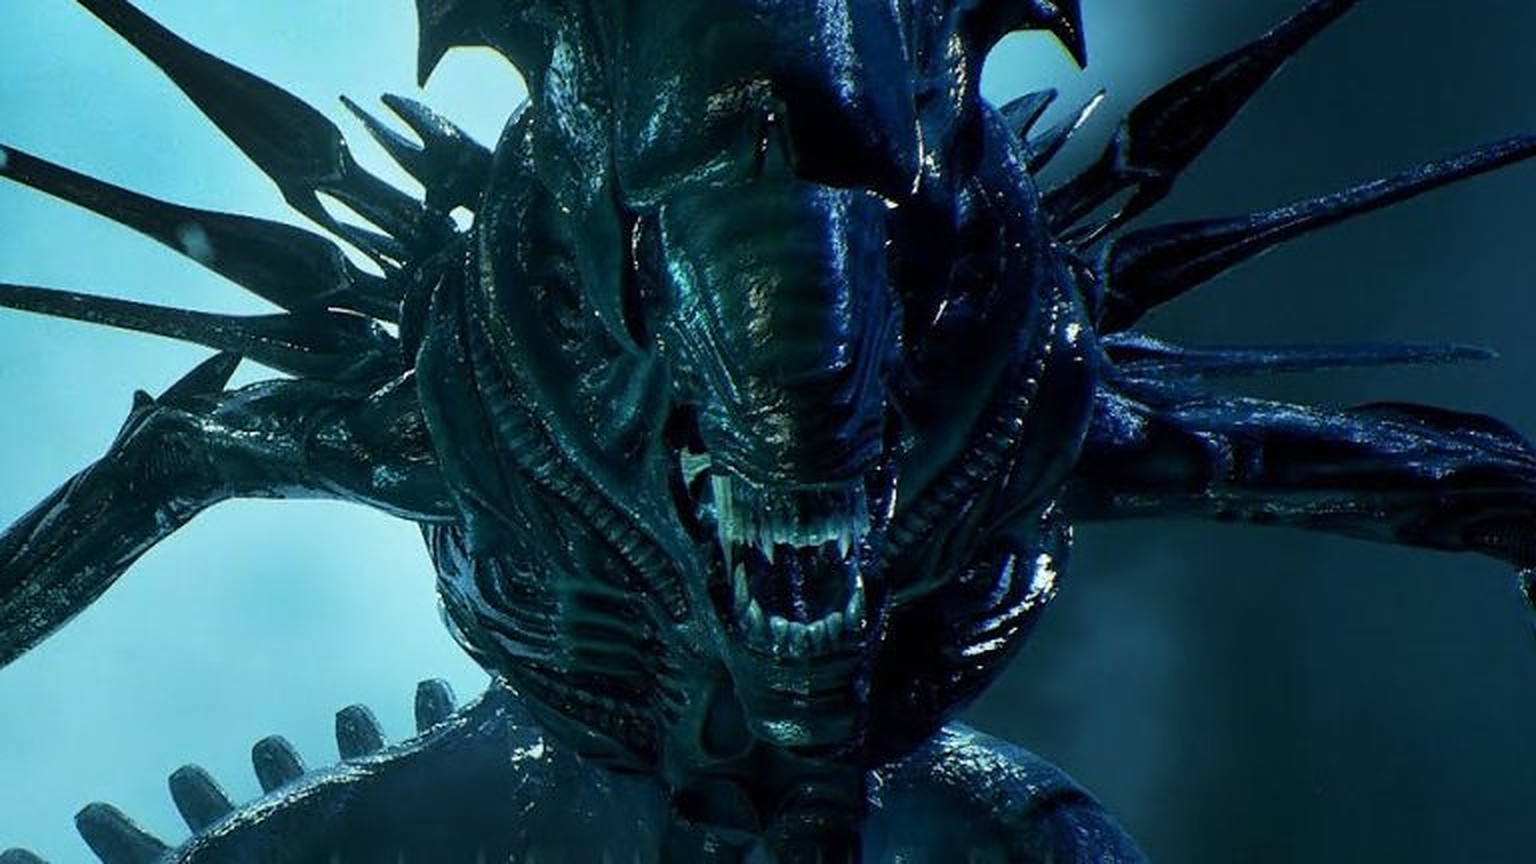 New 'Alien' movie with writer/director Fede Alvarez to be released on Hulu